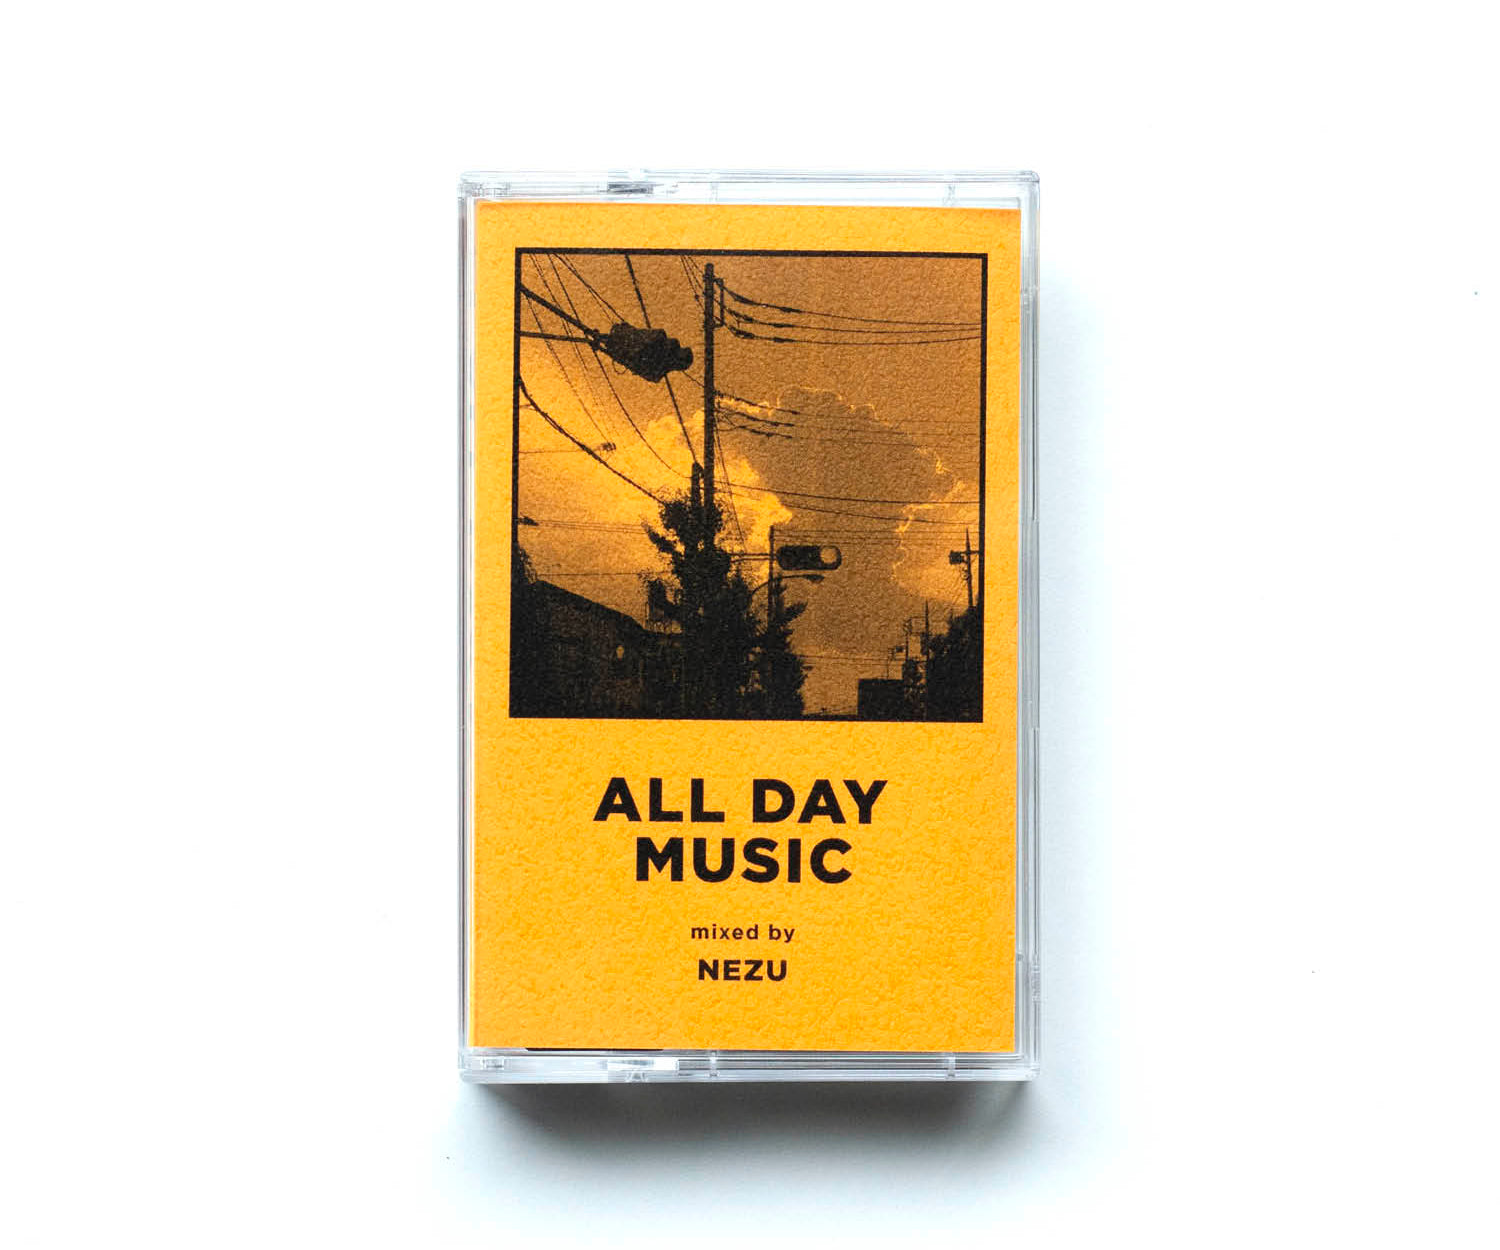 A.D.M. #9 - Mixed by NEZU | LIKE THIS SHOP